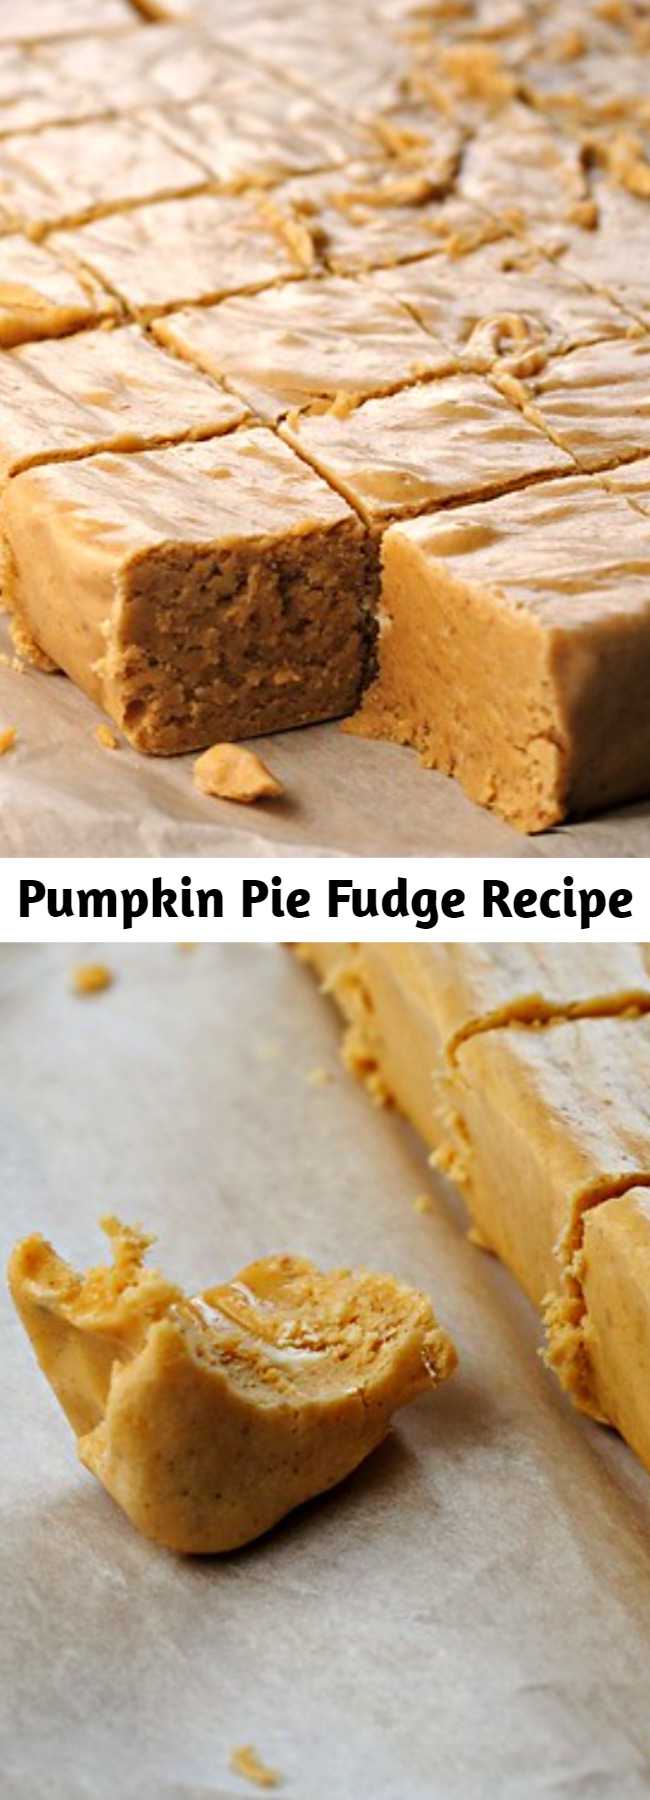 Pumpkin Pie Fudge Recipe - Soft, creamy fudge with all the flavors of your favorite pumpkin pie. It’s the perfect Thanksgiving splurge is you’re looking for a little bit of the real deal. Enjoy!